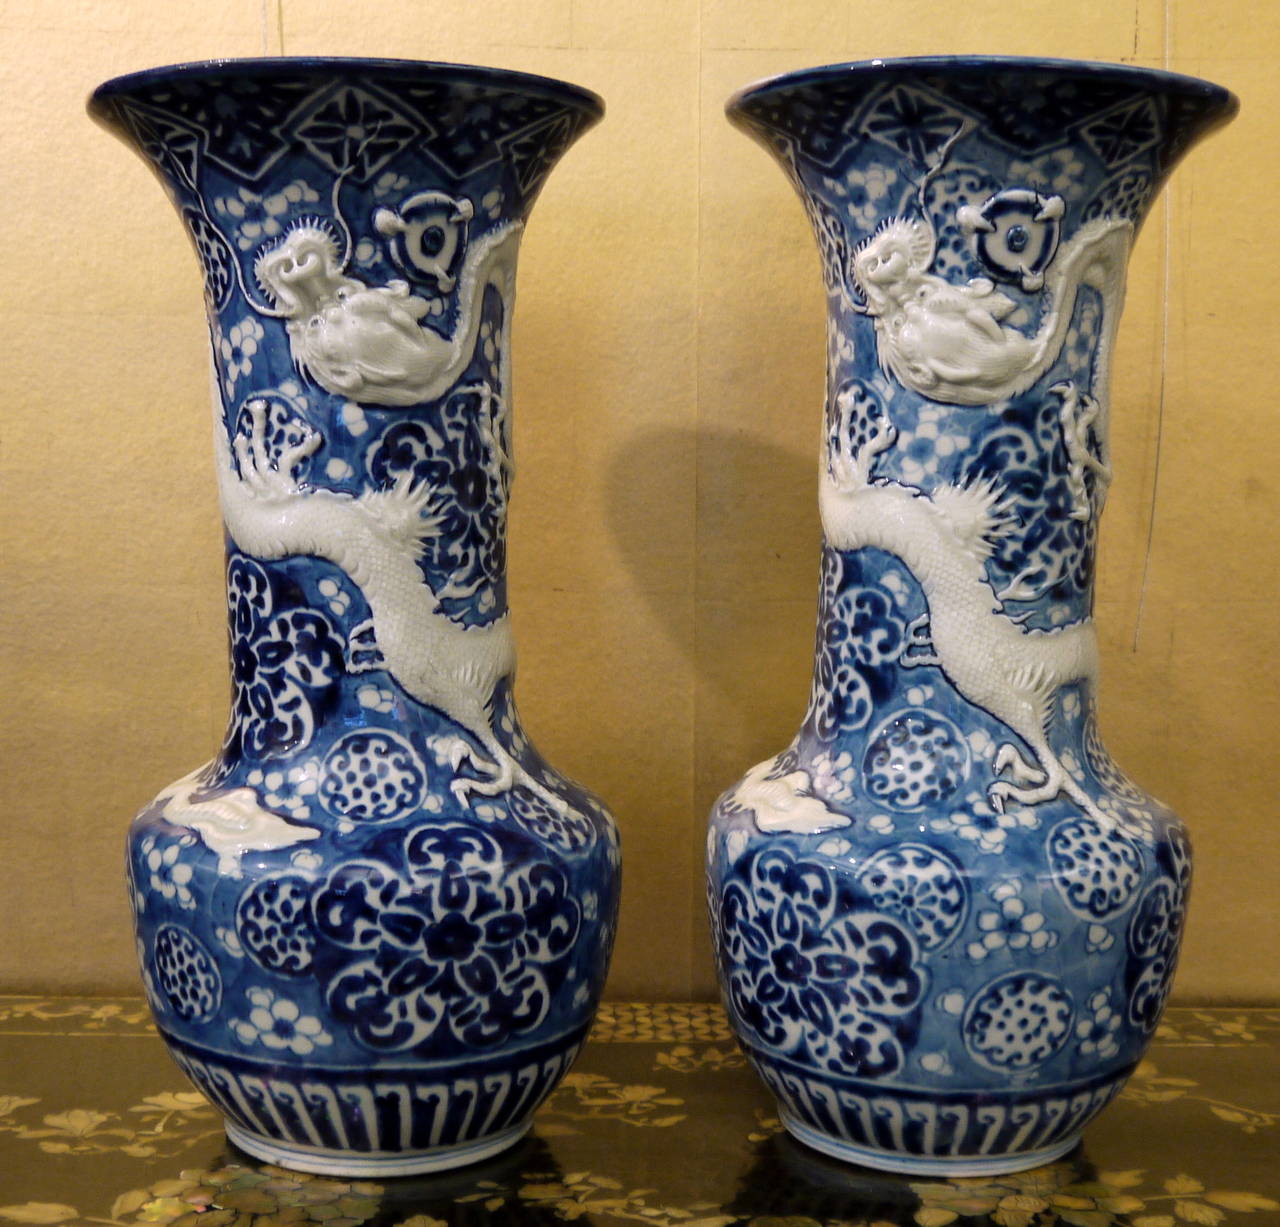 A very dramatic and decorative pair of Japanese antique vases with floral background, and raised design of fierce dragons encircling each vase.